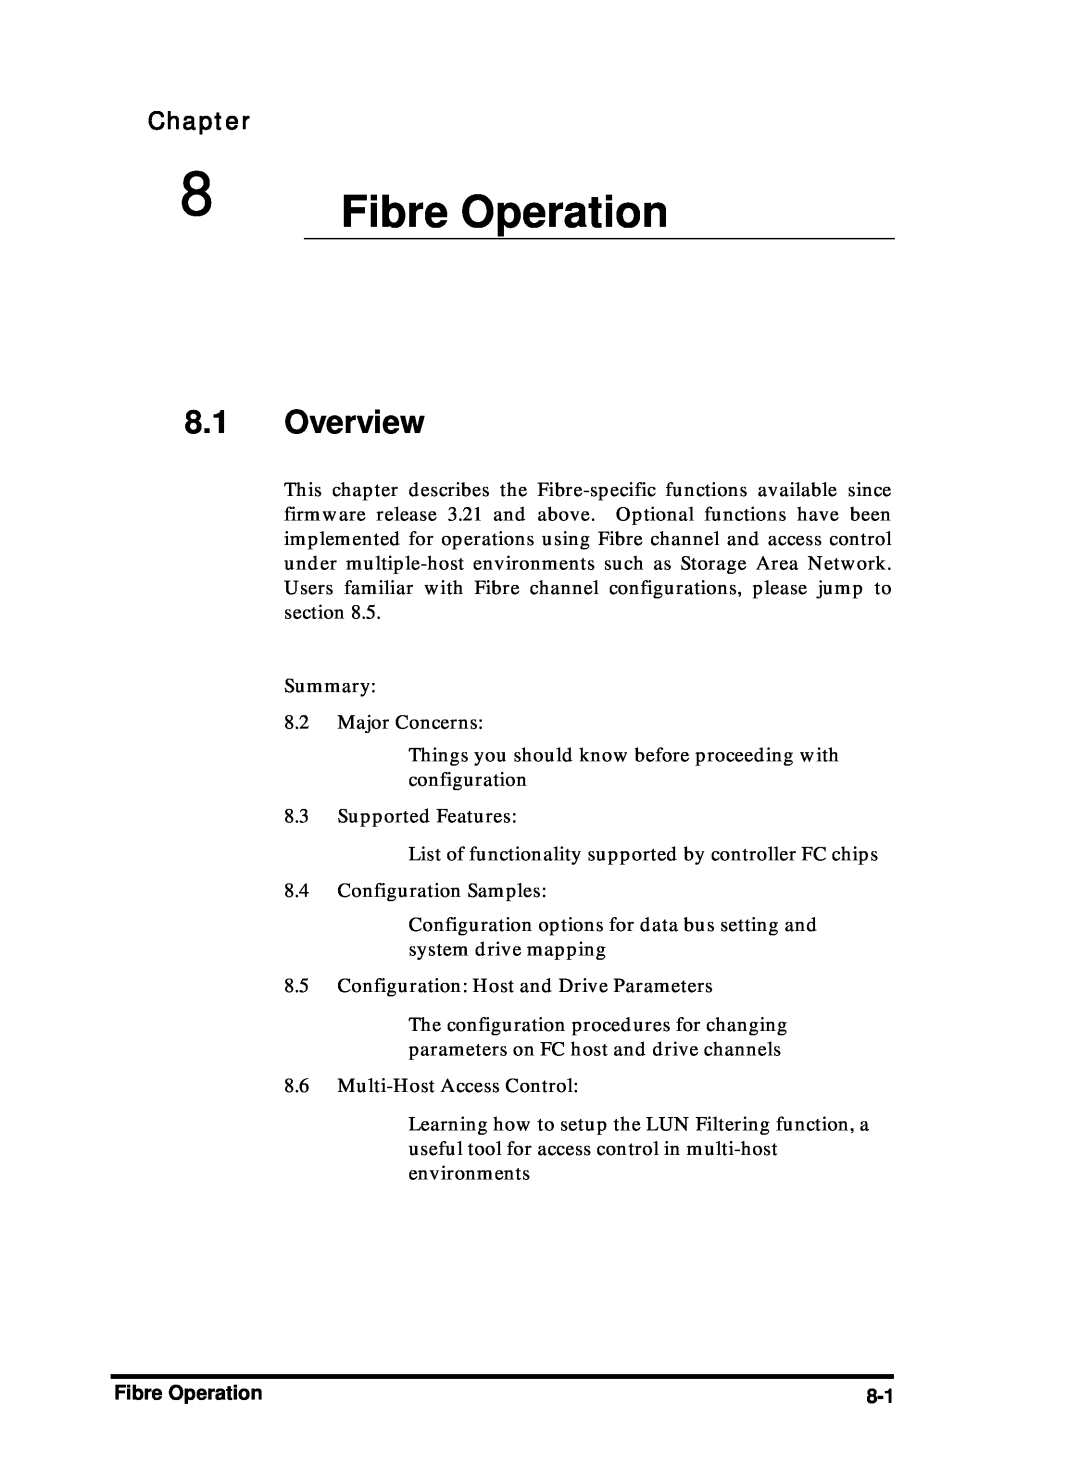 Compaq Infortrend manual Fibre Operation, Overview, Chapter 